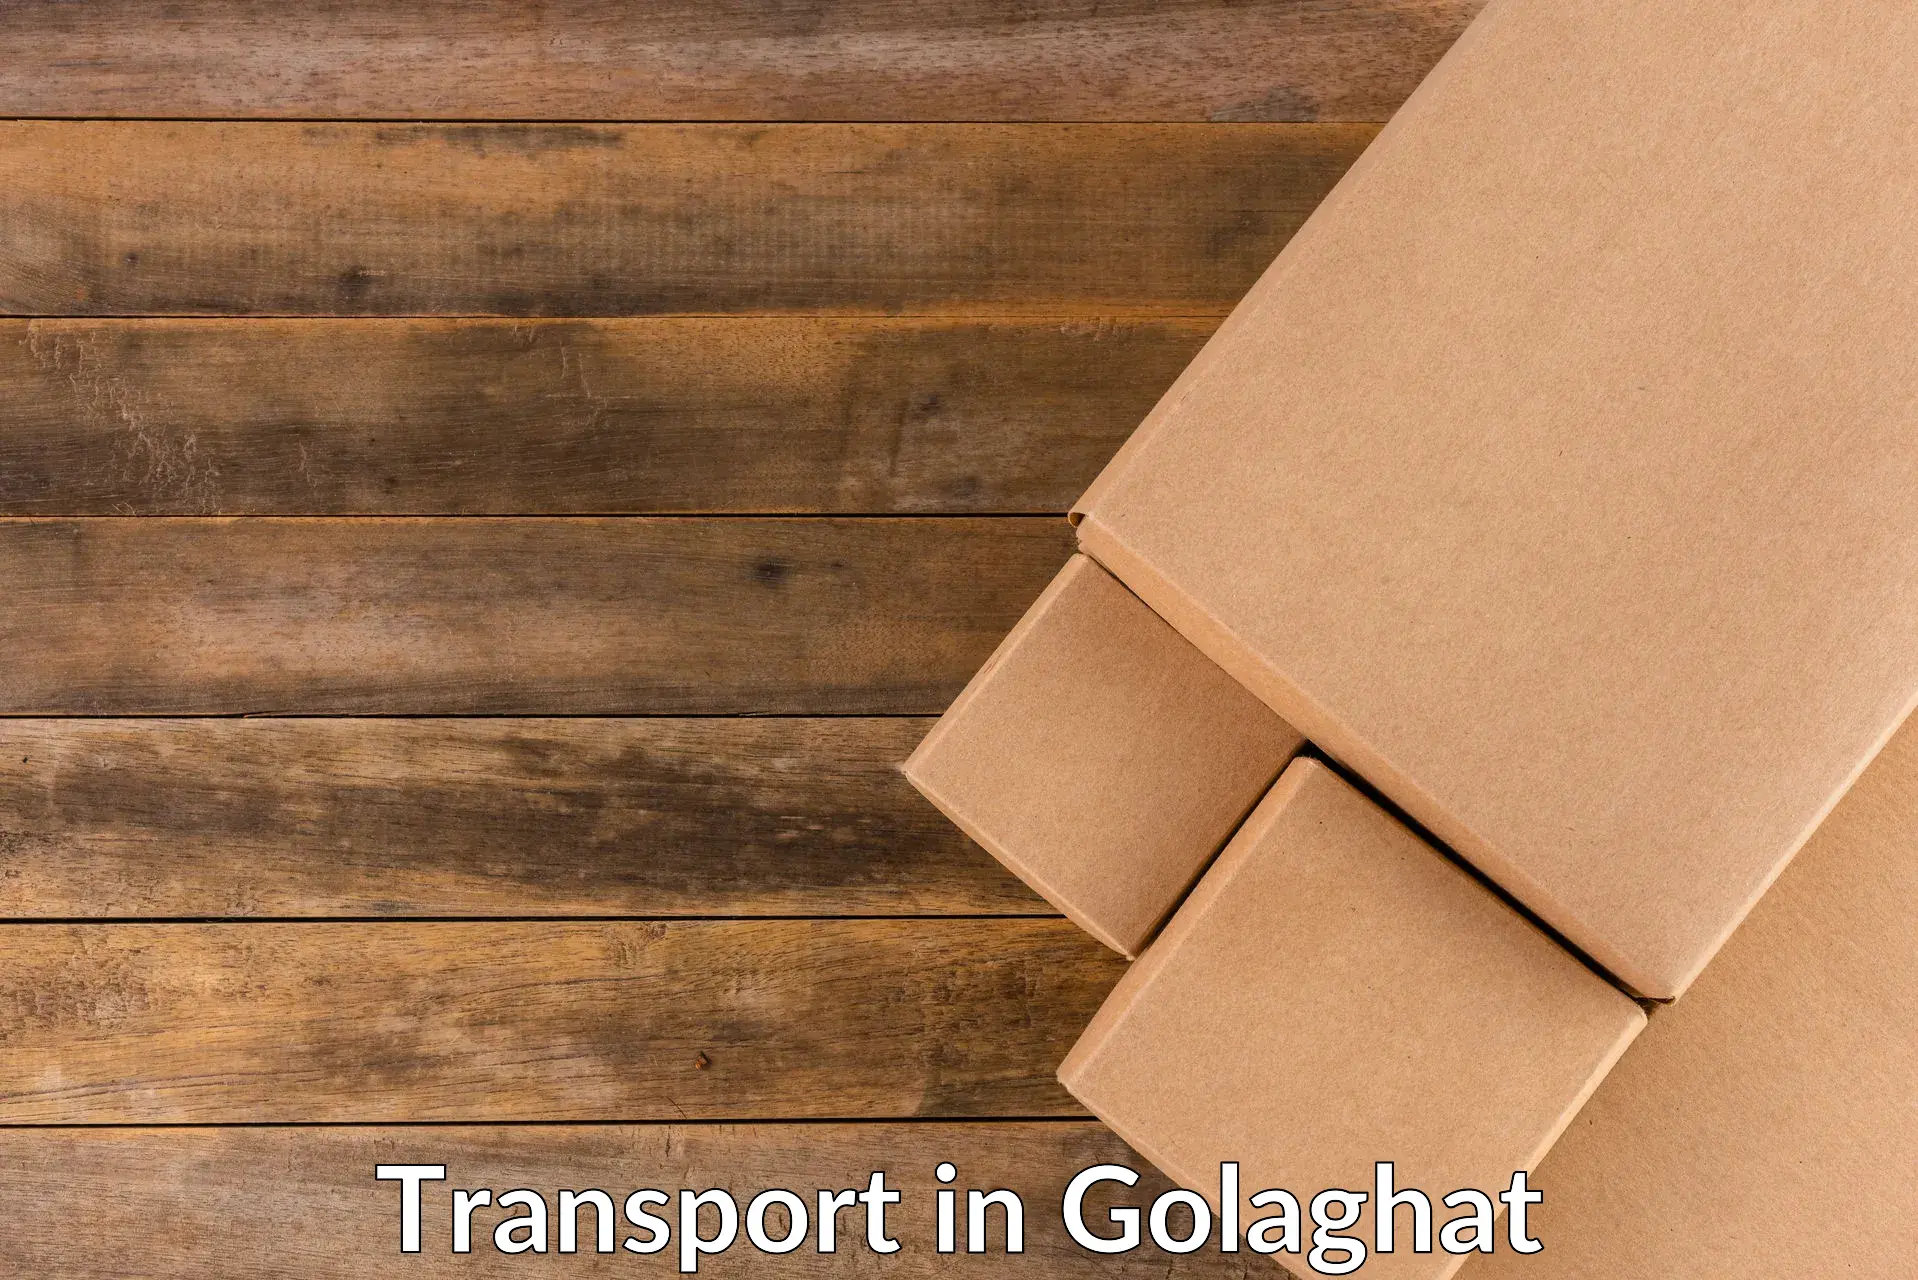 Cargo transportation services in Golaghat